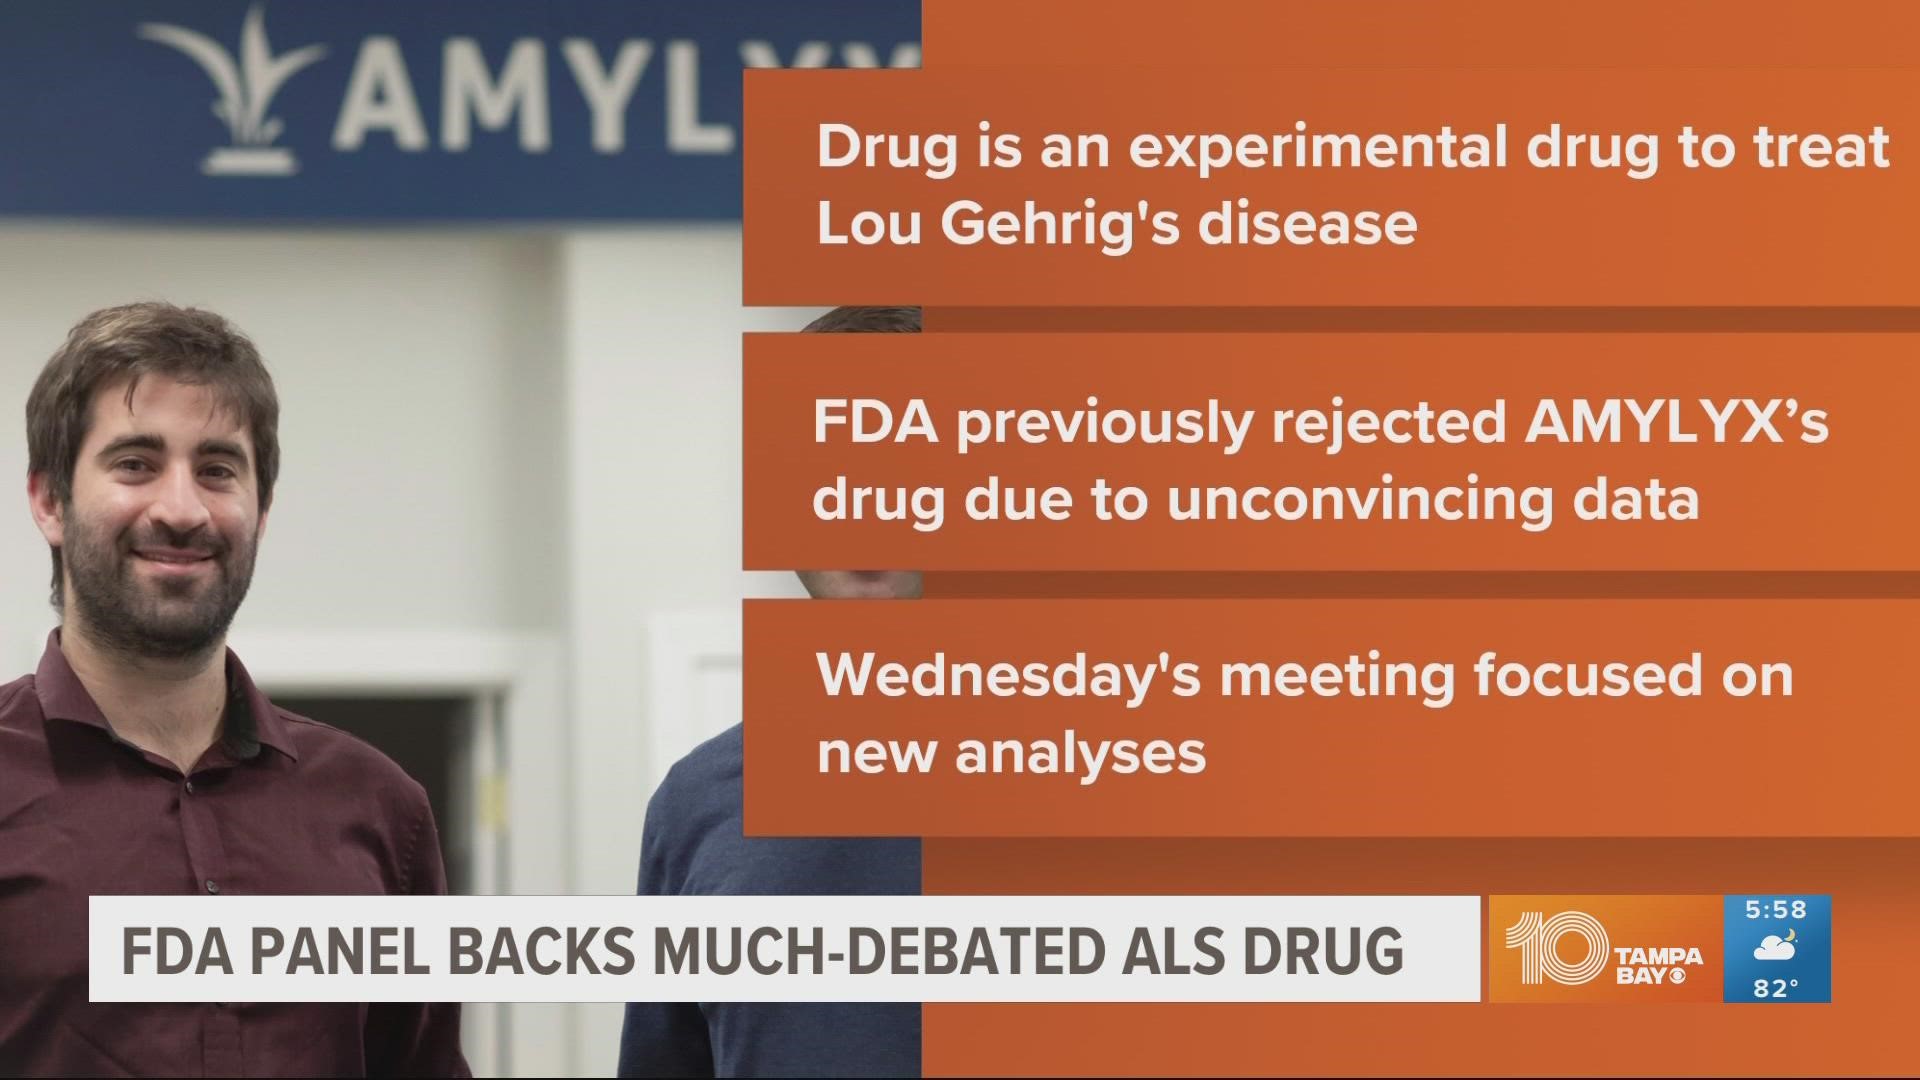 A panel of federal health advisers voted Wednesday to recommend approval for an experimental drug to treat Lou Gehrig’s disease.